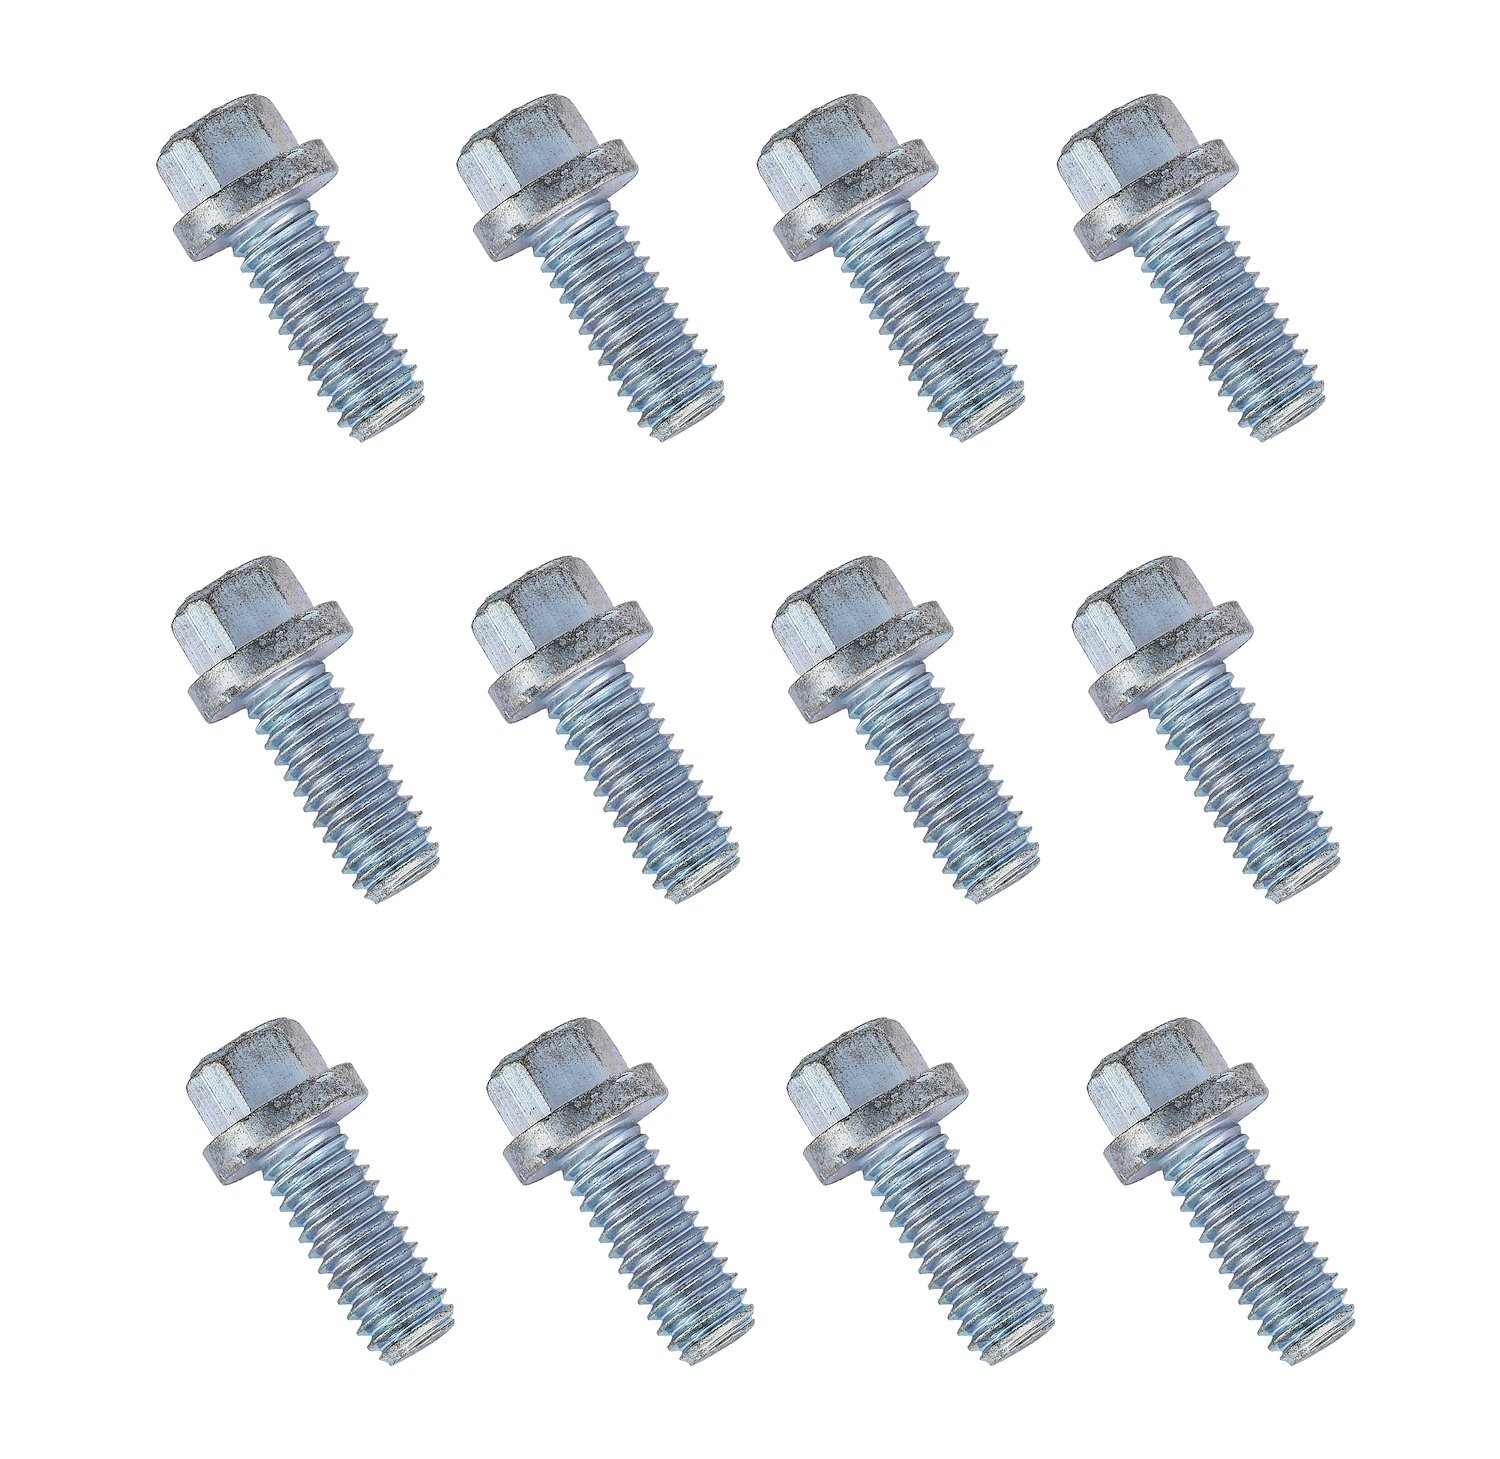 High Quality Auto Parts Stainless Steel Ladder Screw Rivets Semi